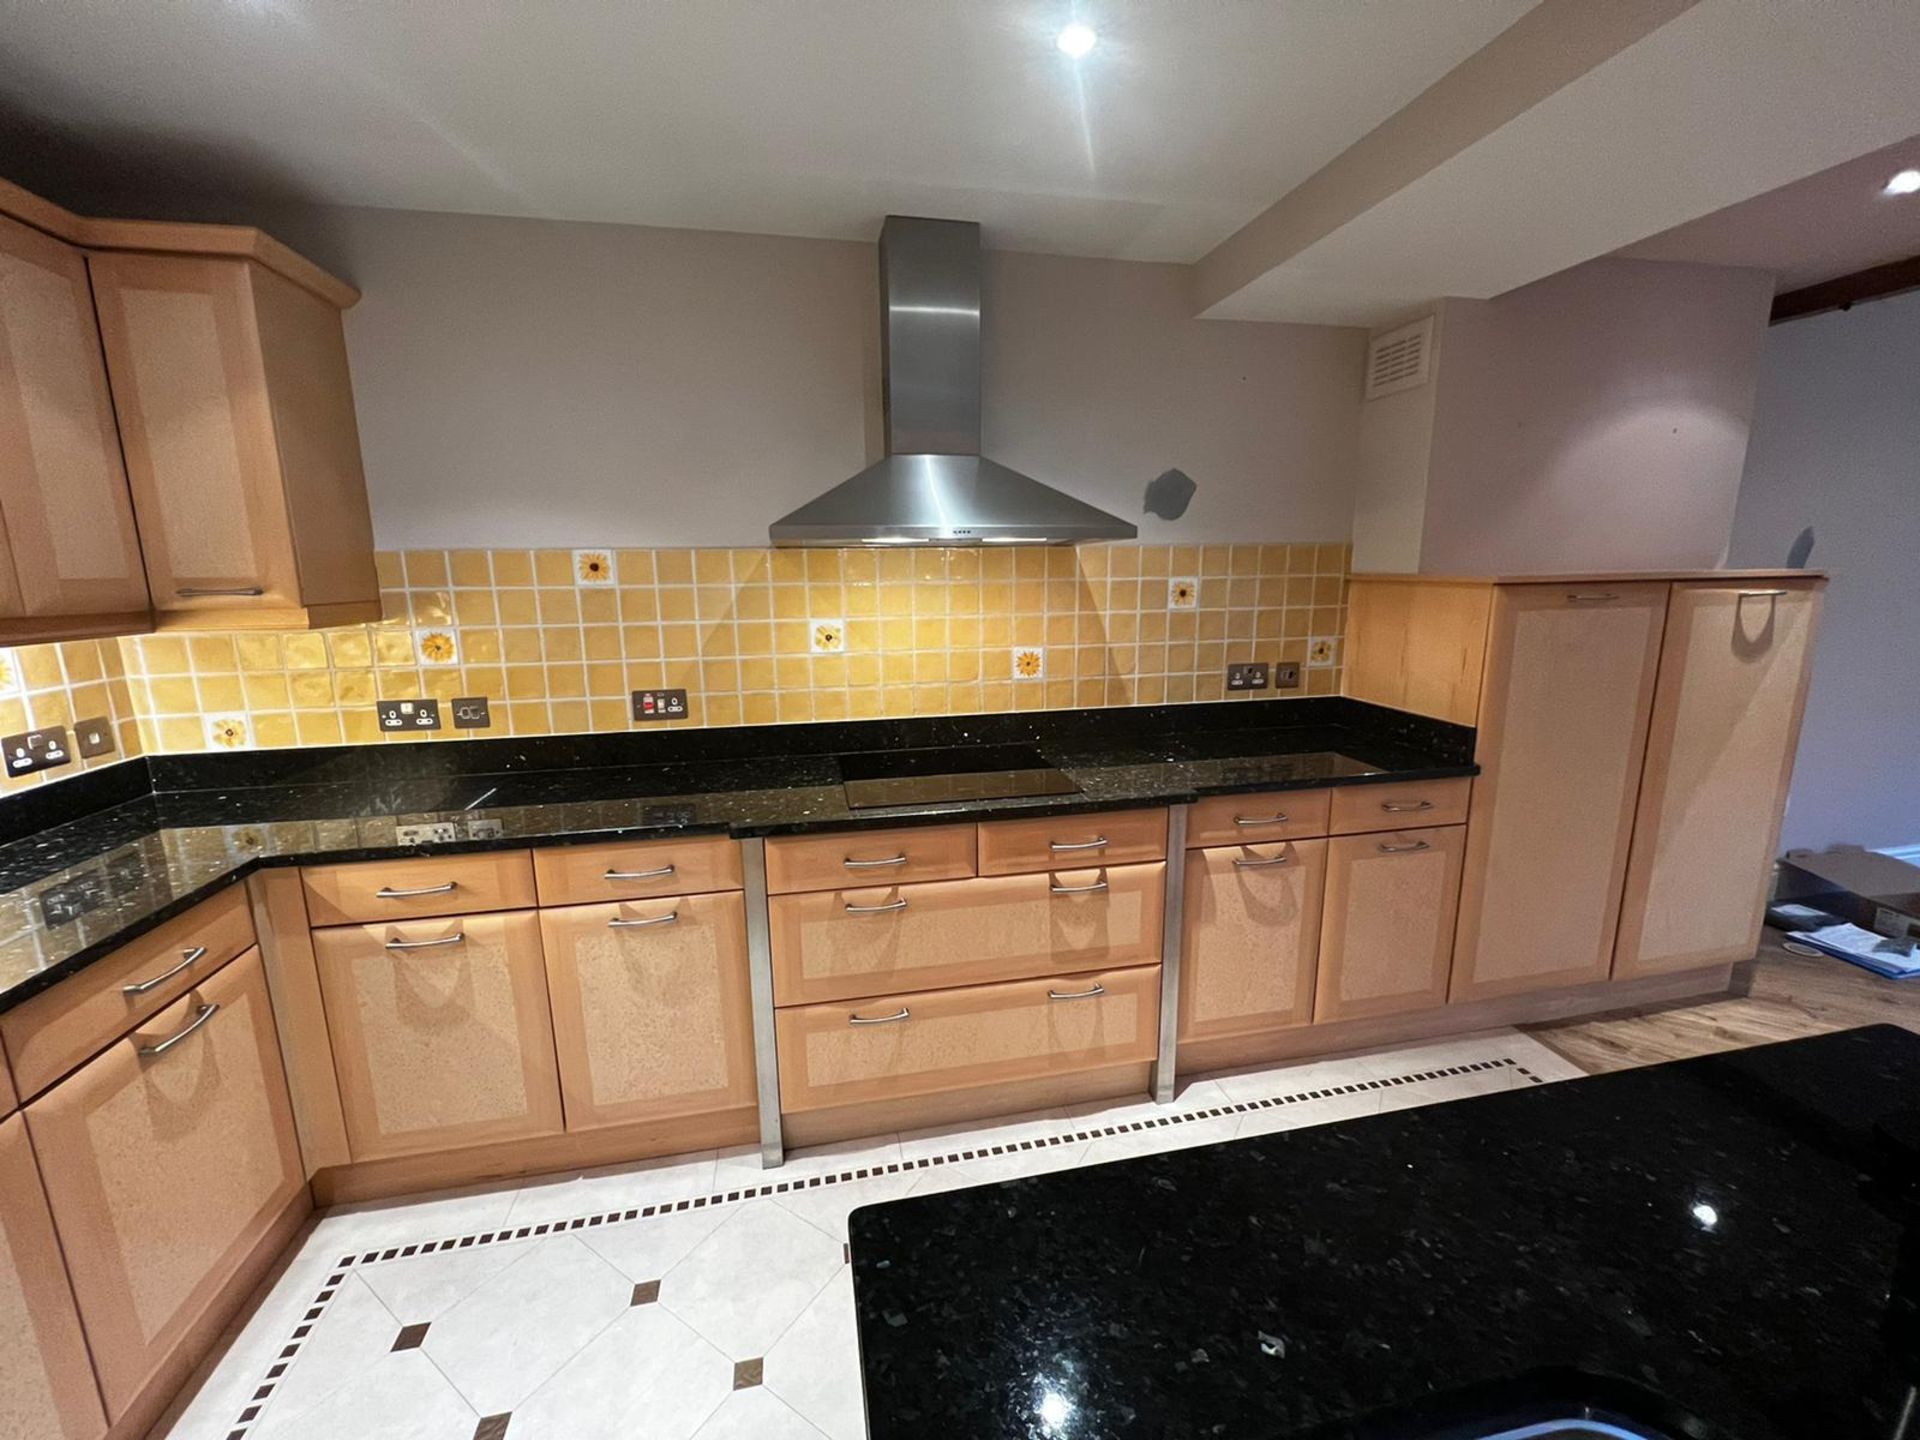 1 x English Rose Bespoke Fitted Kitchen With 30mm Granite Worktops, Integrated Neff Appliances And - Image 9 of 23